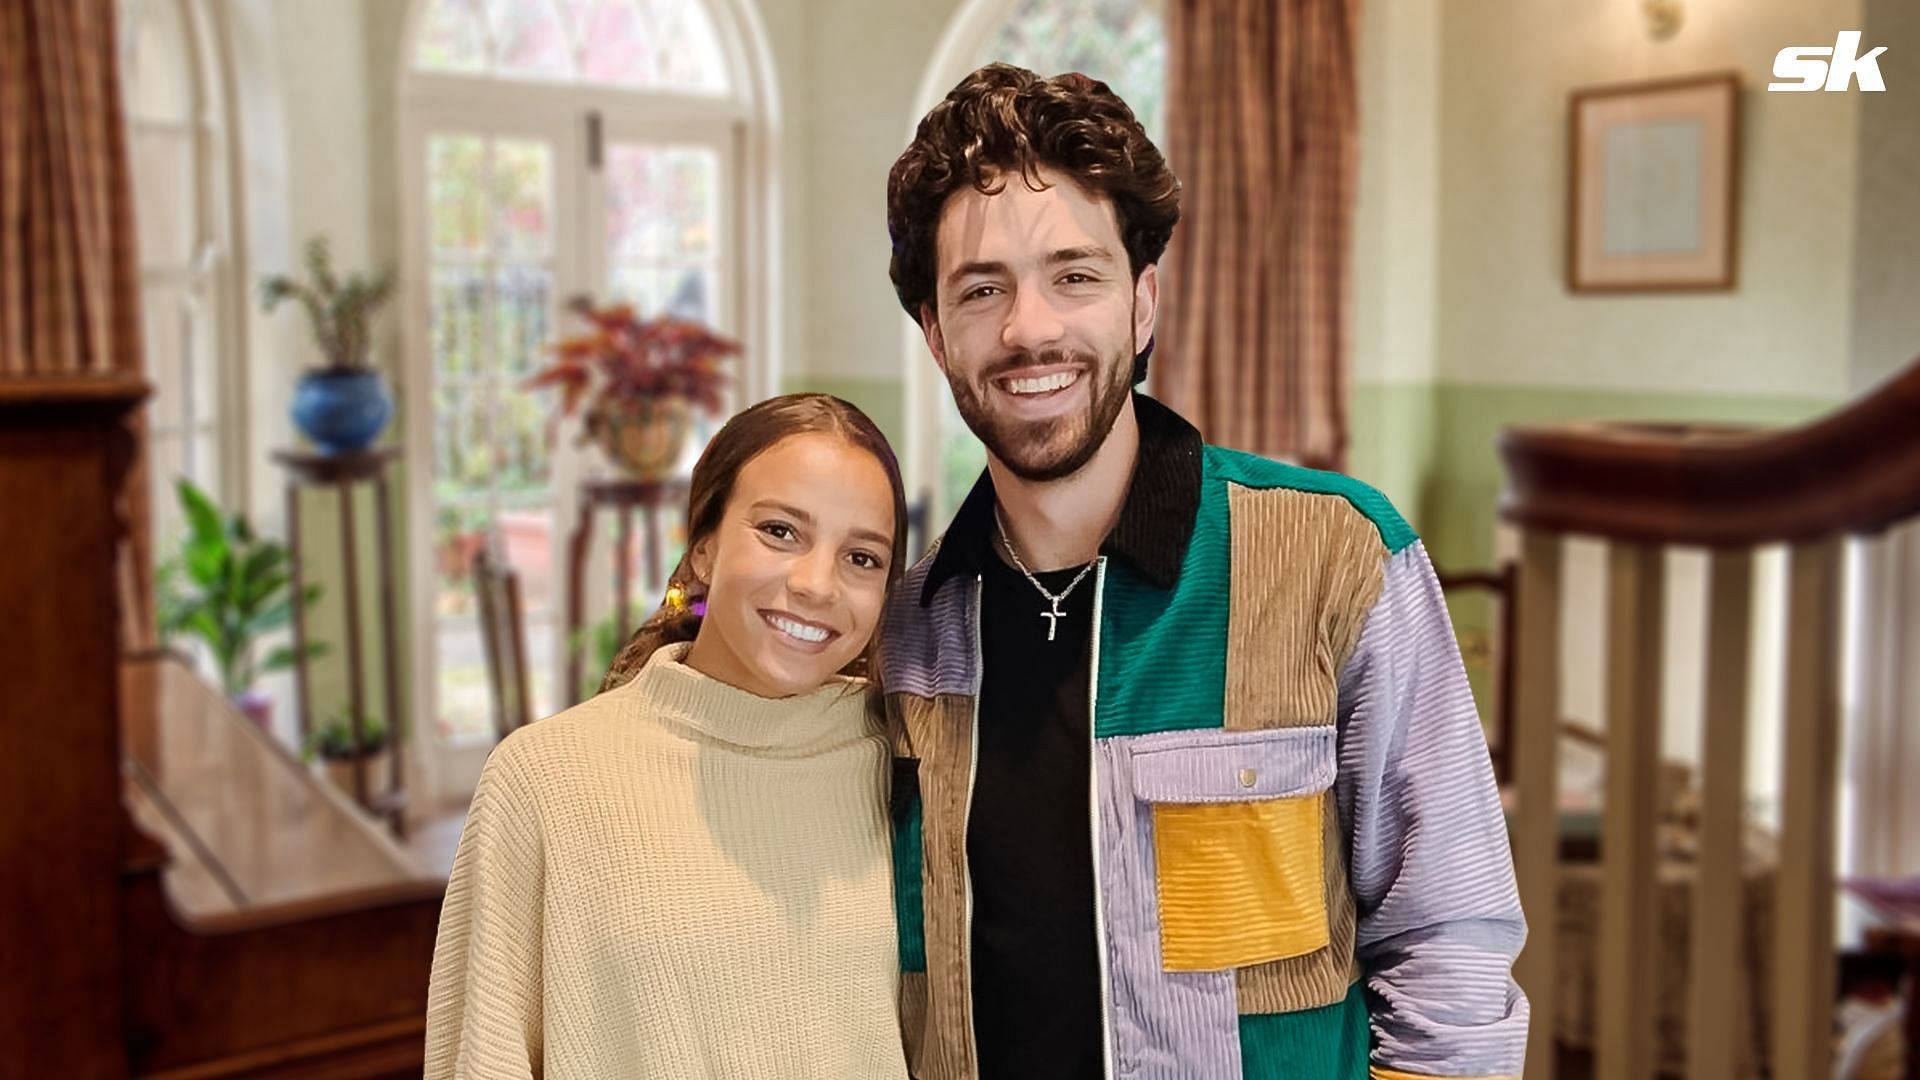 Mallory Pugh spills beans on Dansby Swanson